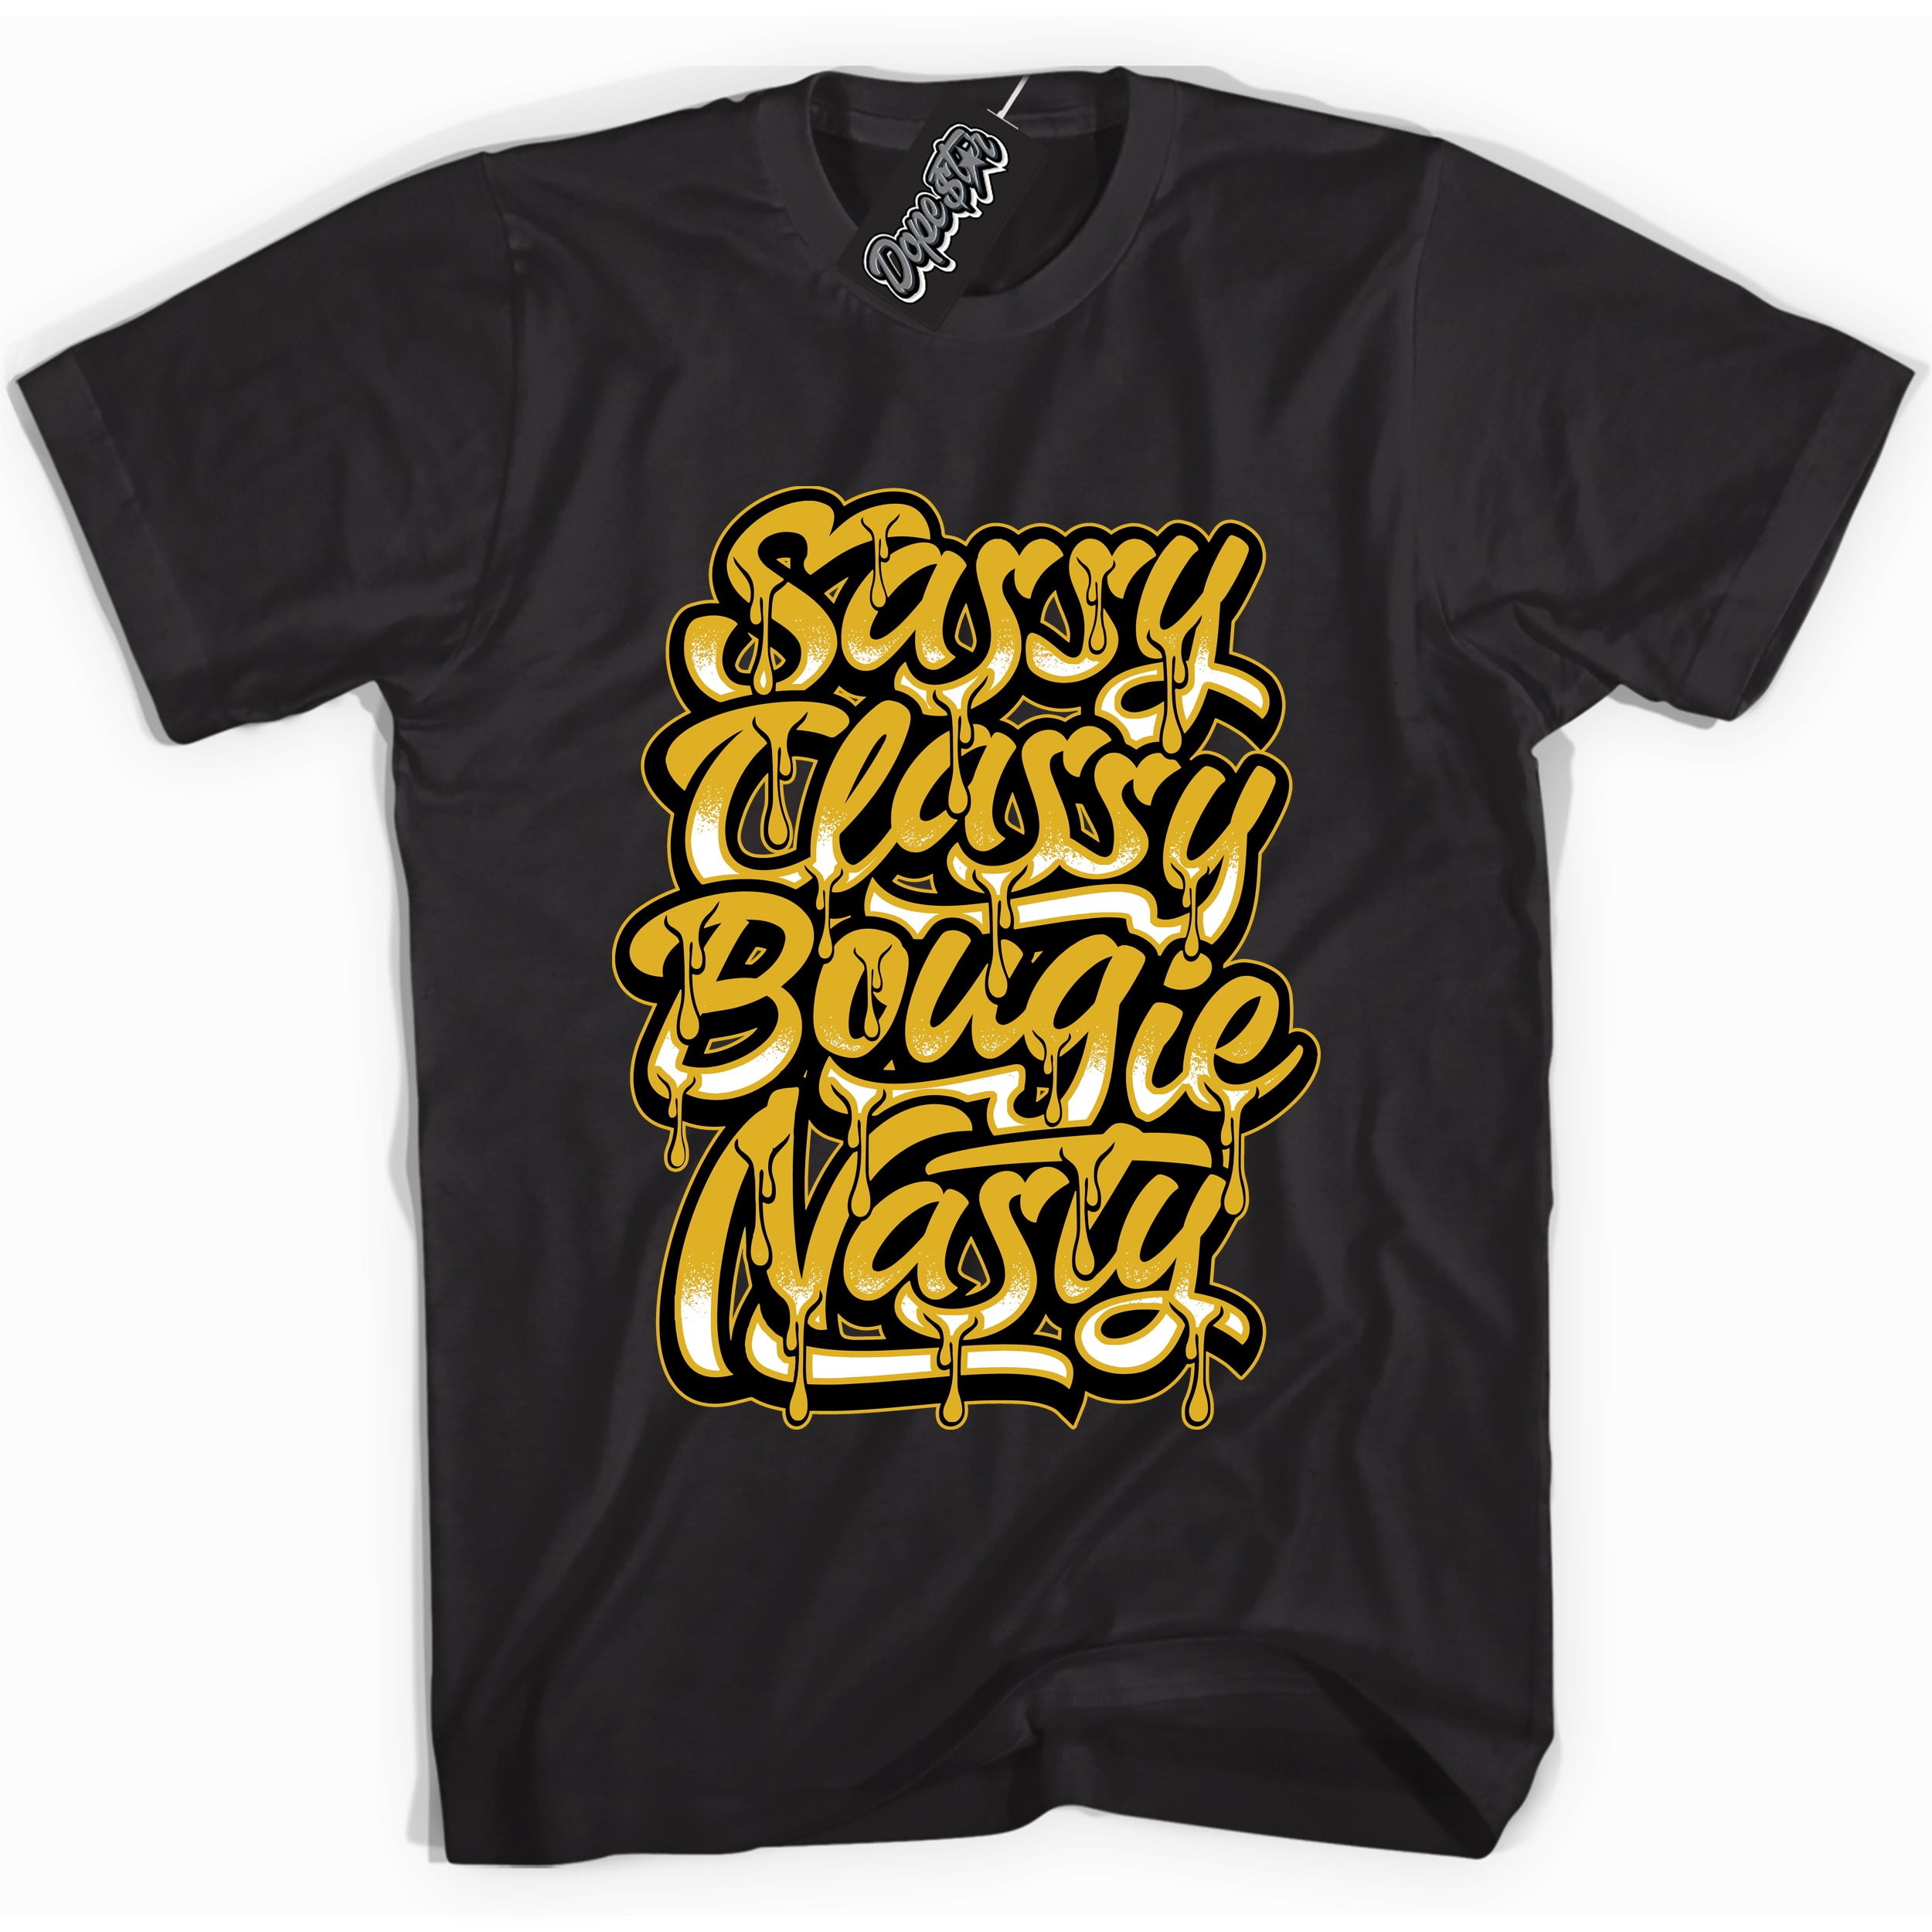 Cool Black Shirt with “ Sassy Classy ” design that perfectly matches Yellow Ochre 6s Sneakers.